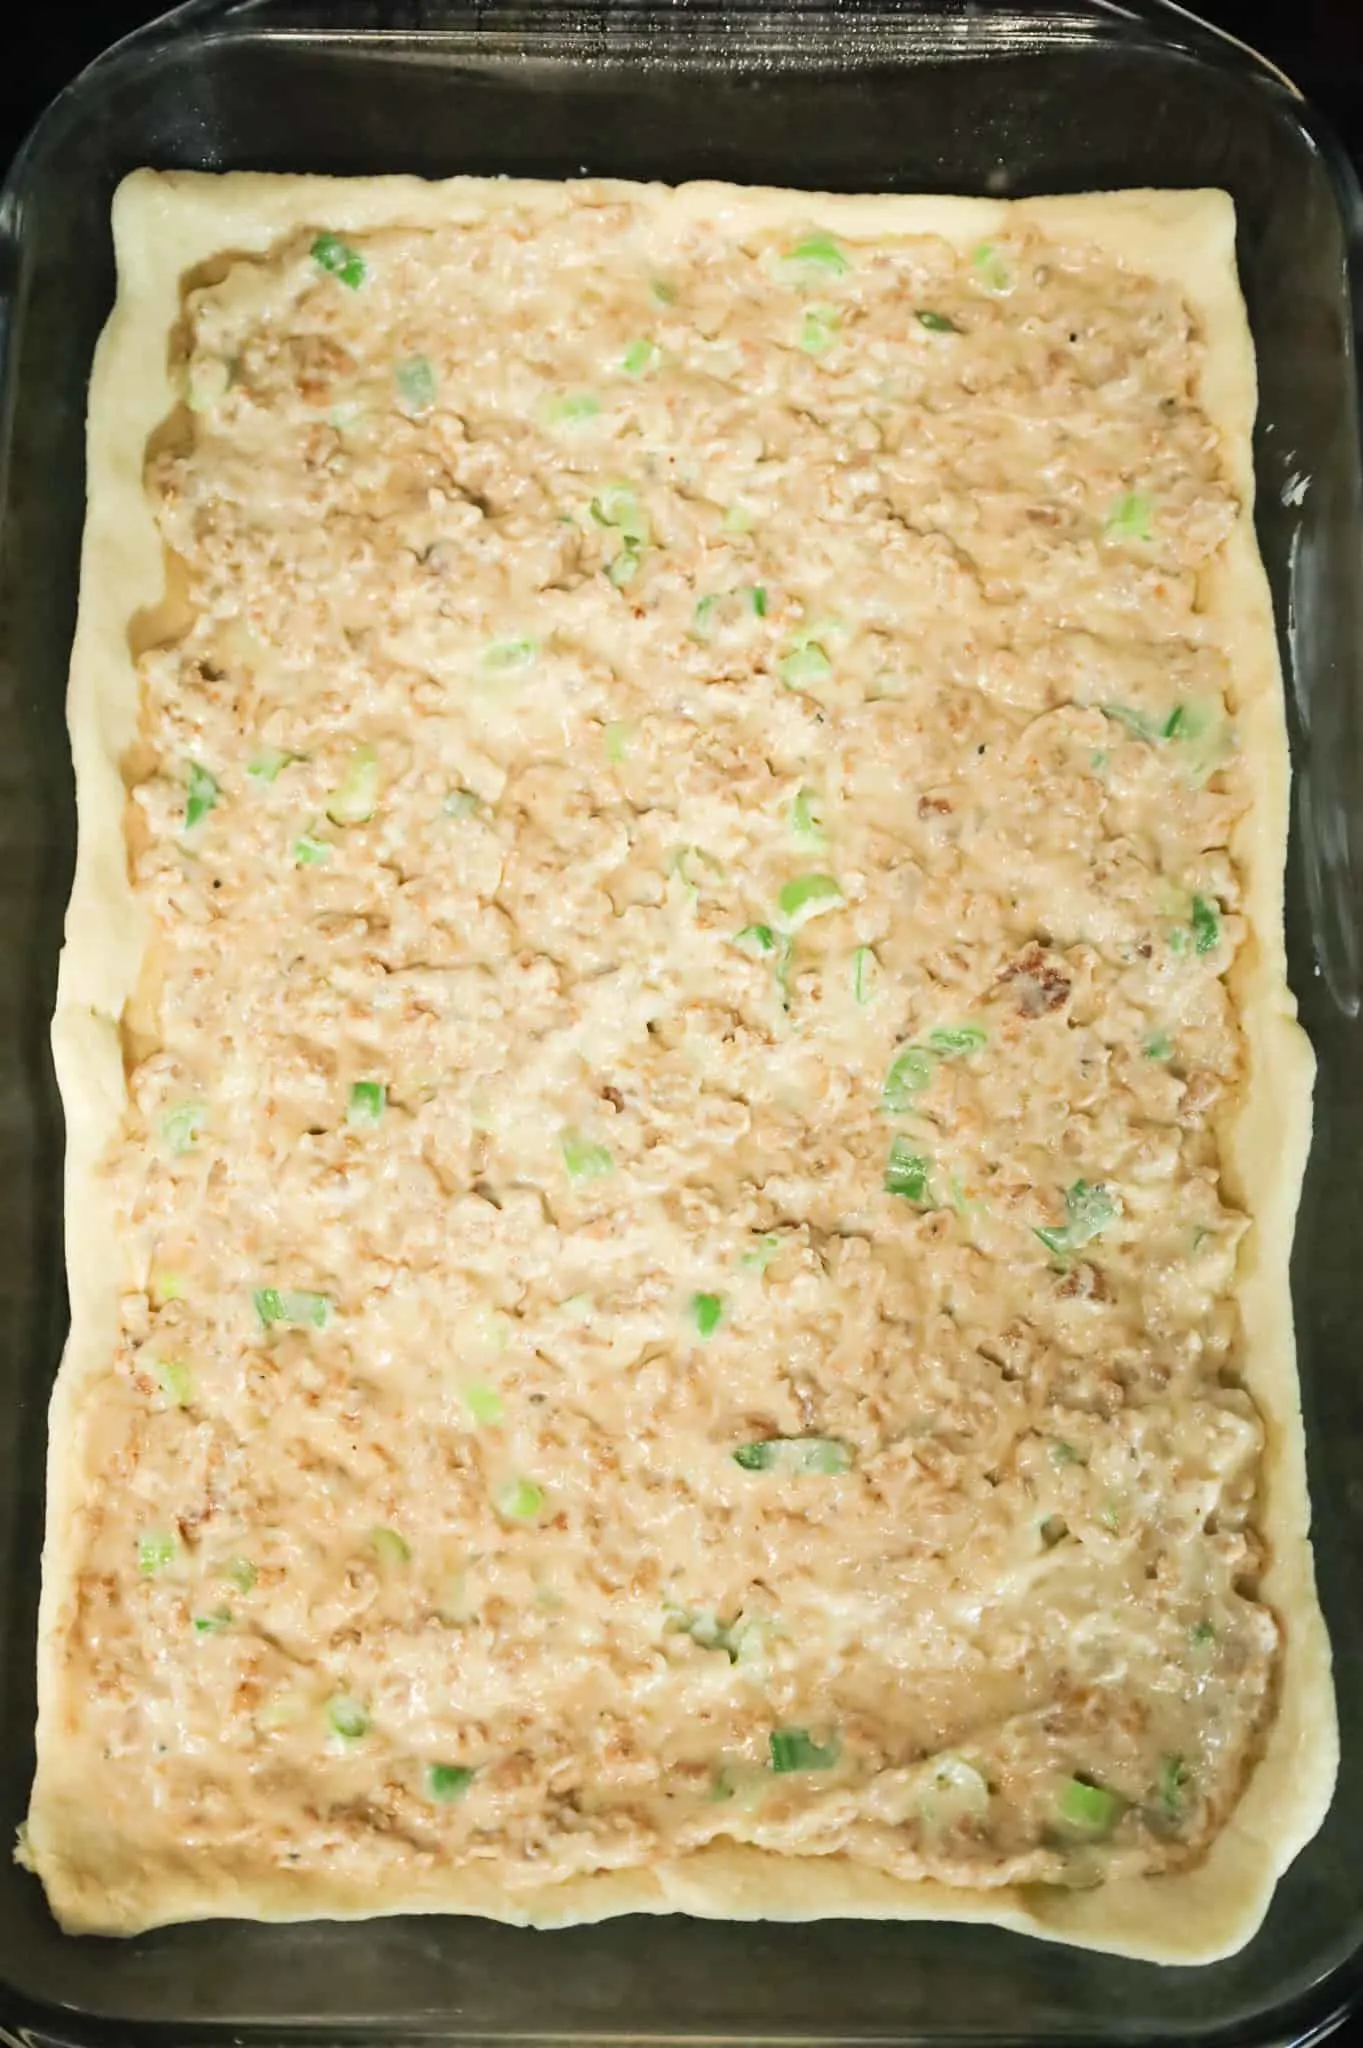 cream cheese and sausage mixture on top of crescent dough in a baking dish